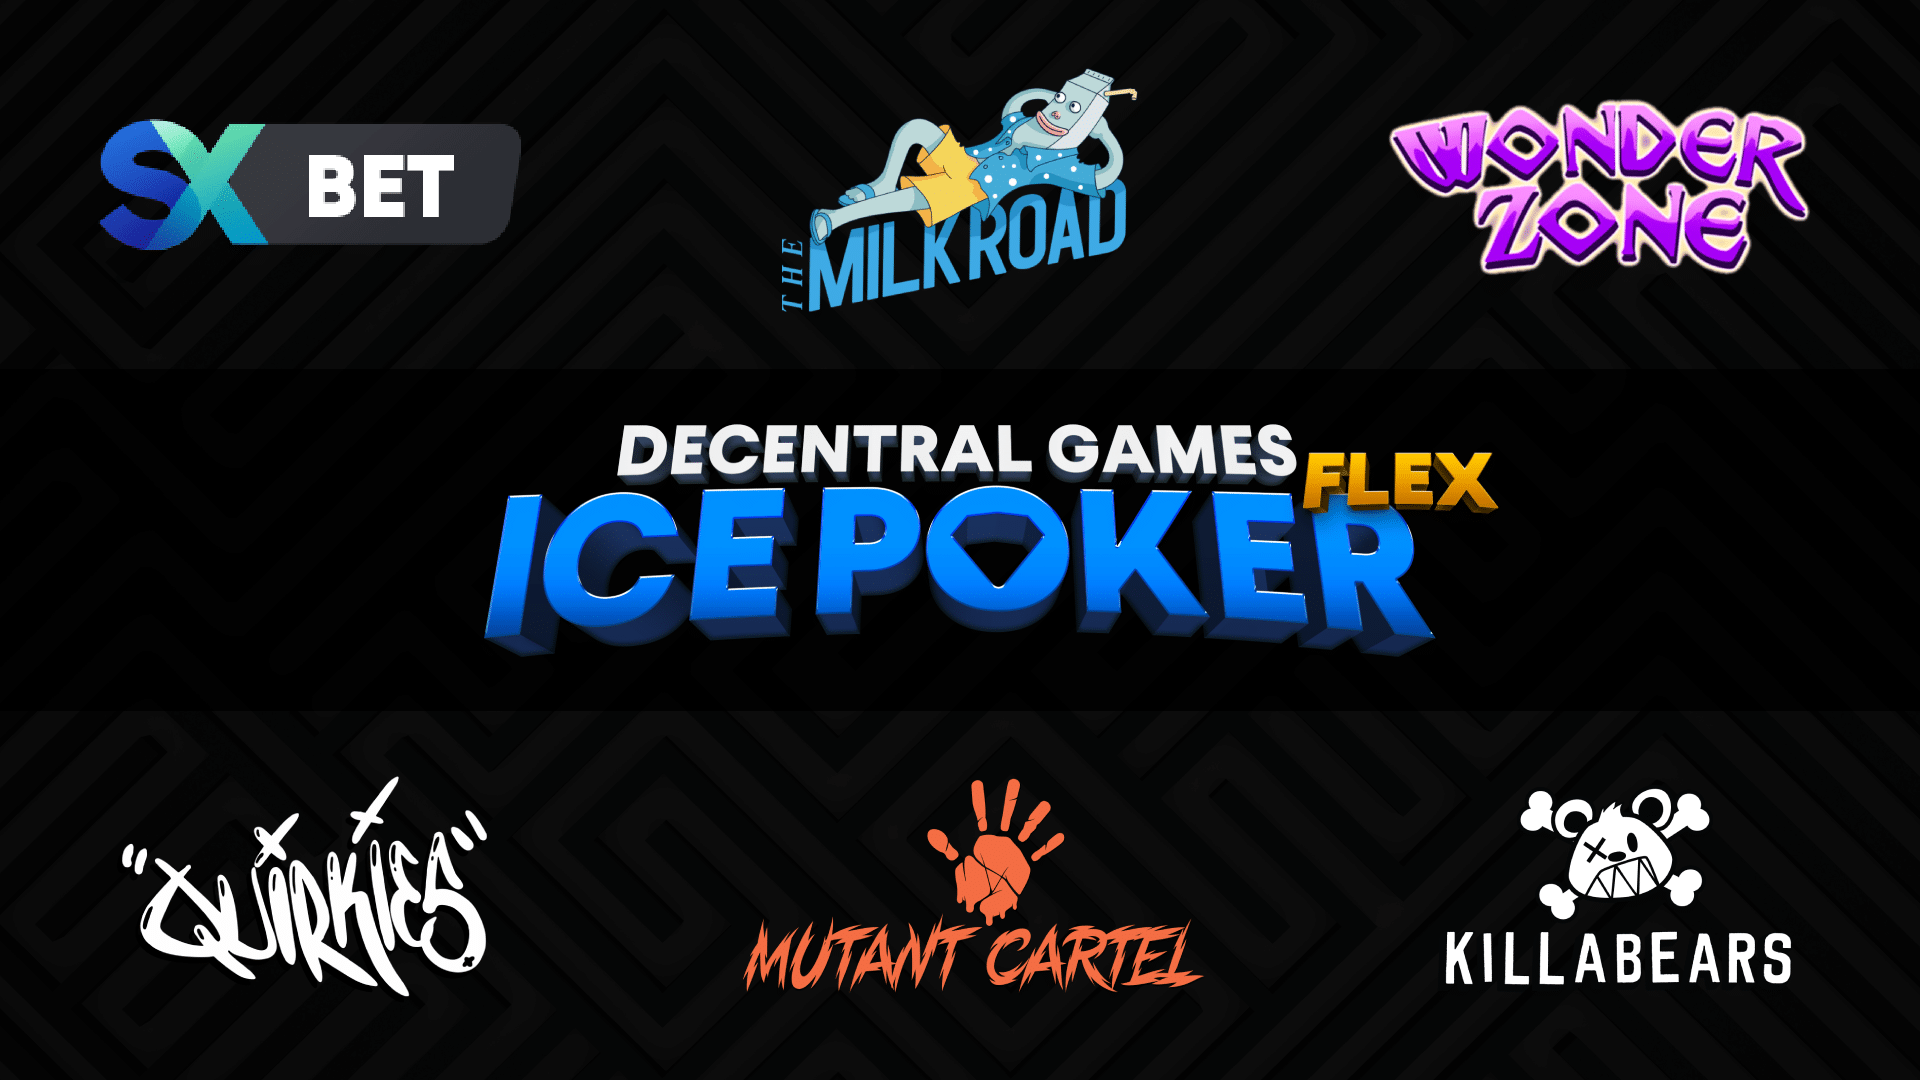 Decentral Games Launches ICE Poker Flex and Tournament Mode With Several Partnerships